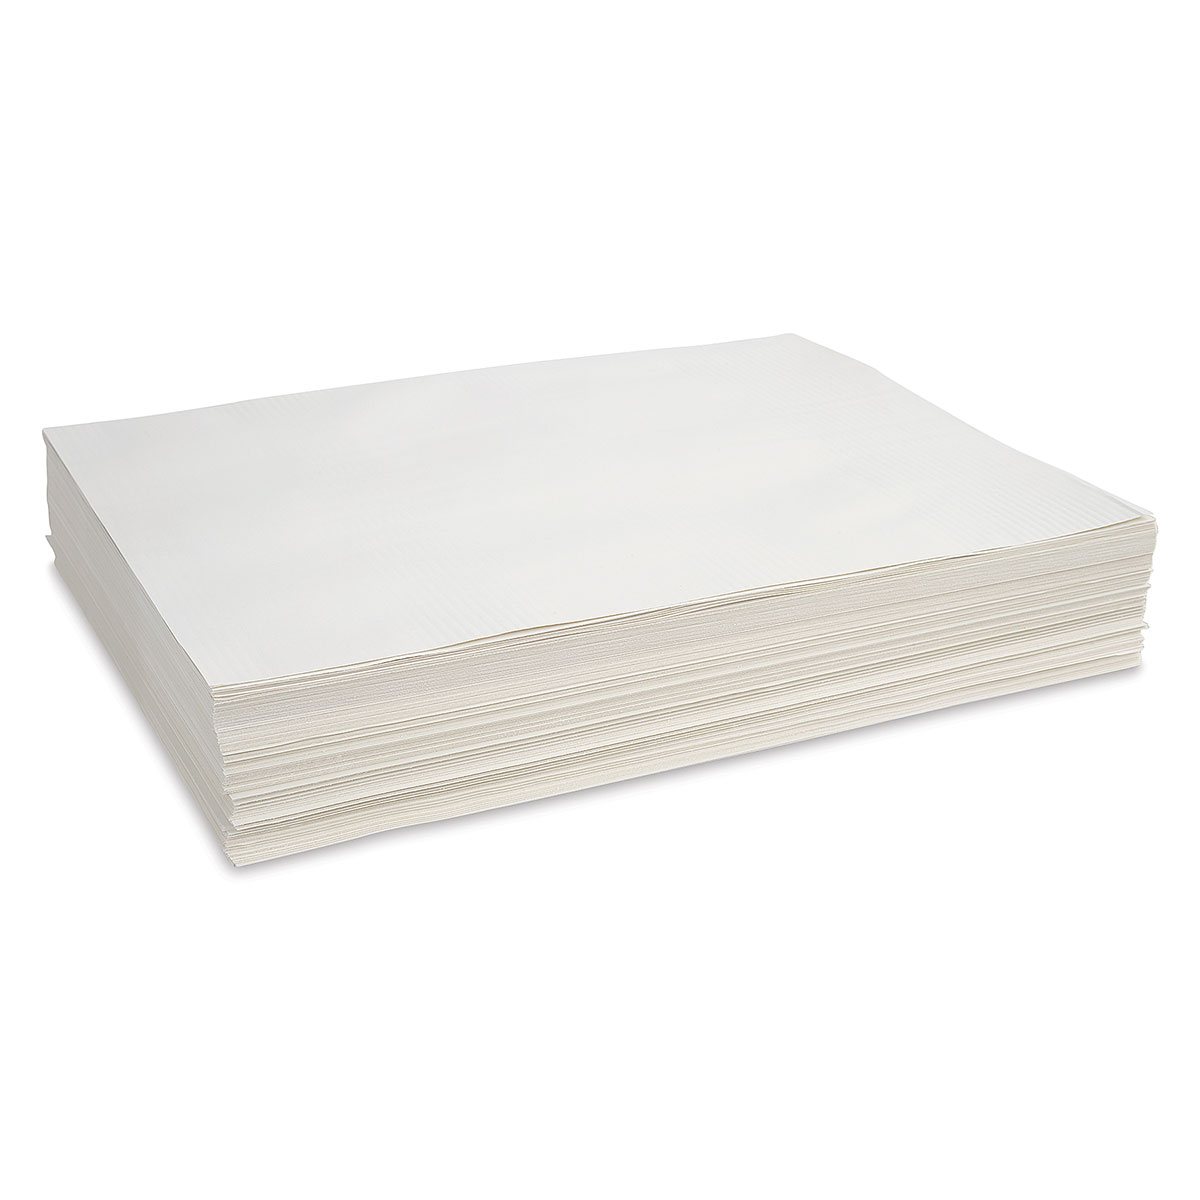 Blick Sulphite 80 lb Drawing Papers 18" x 24", White, 500 Sheets